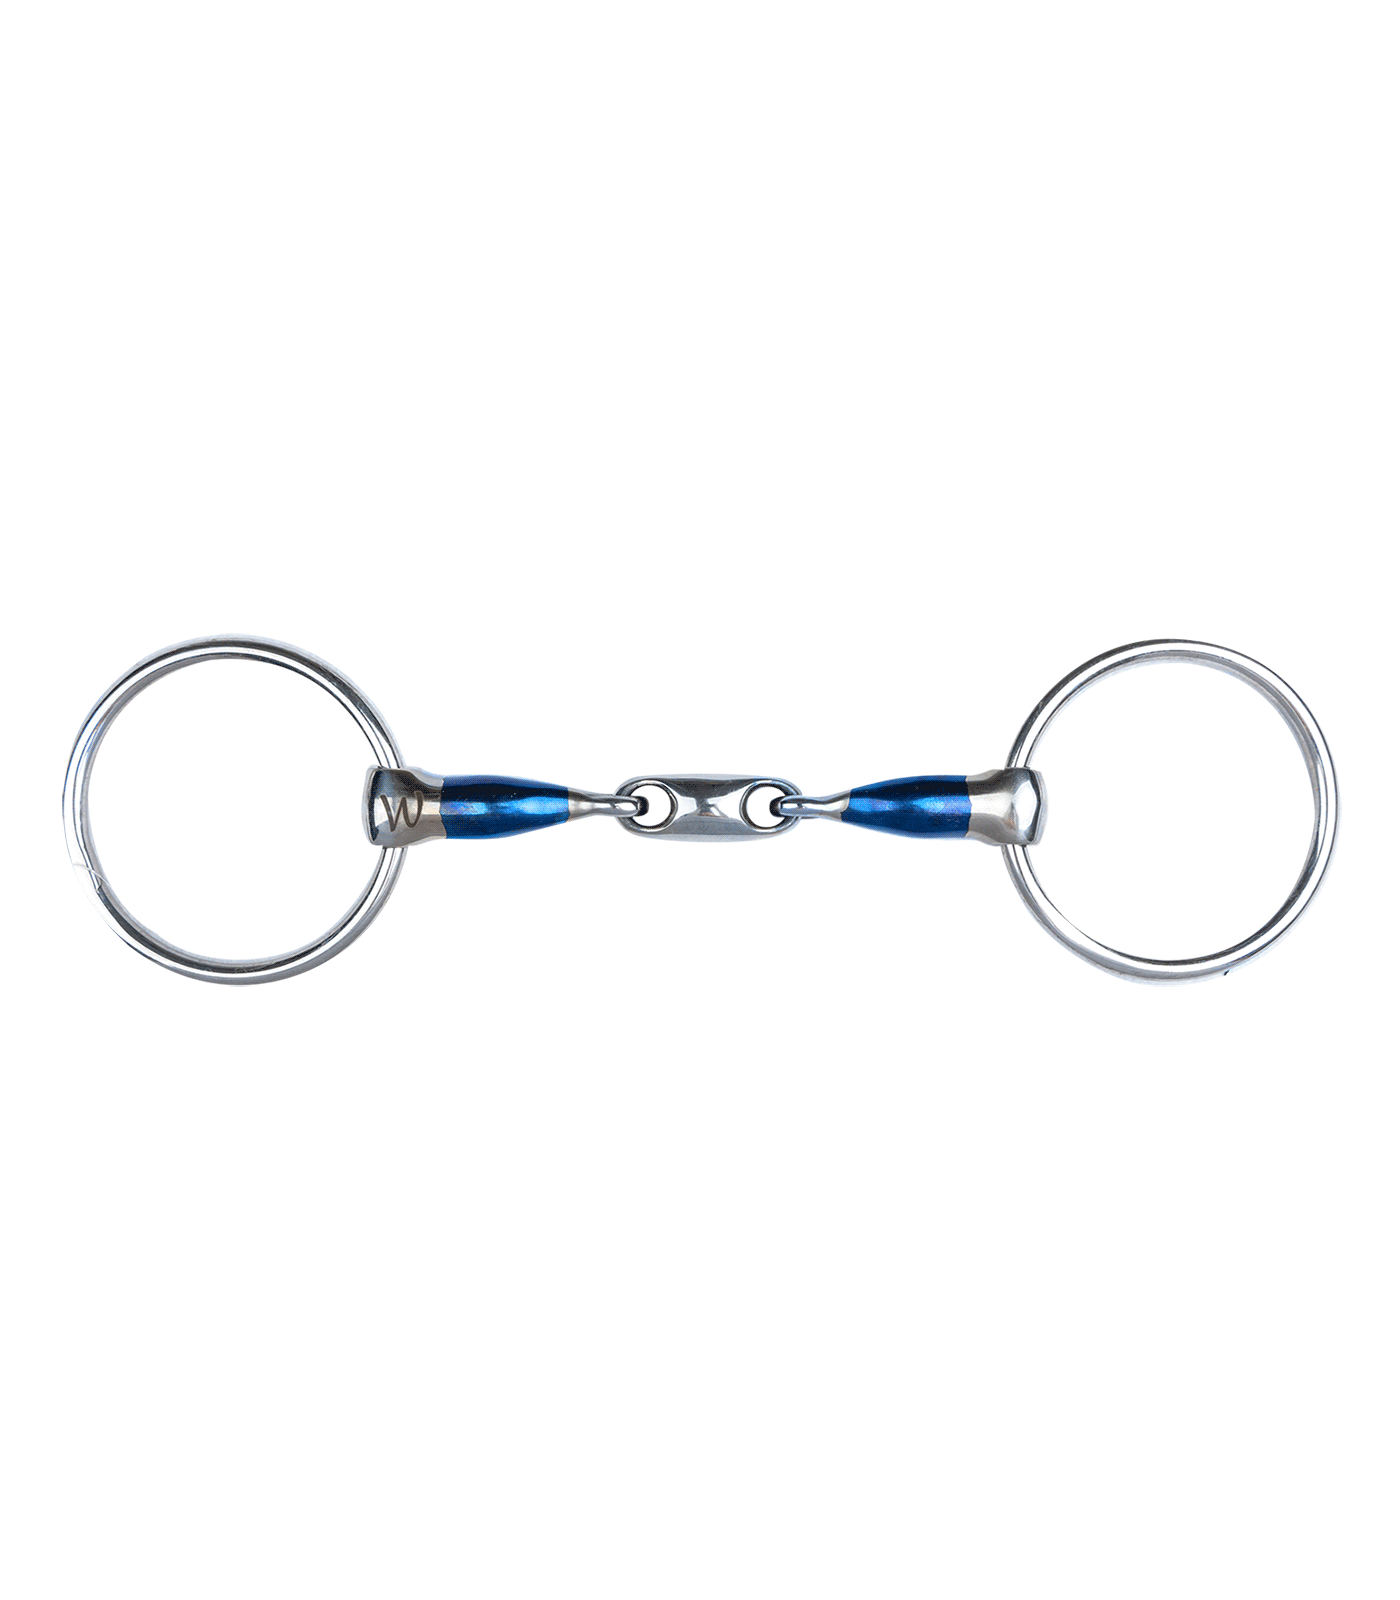 Sweet Iron Snaffle Bit, double-jointed